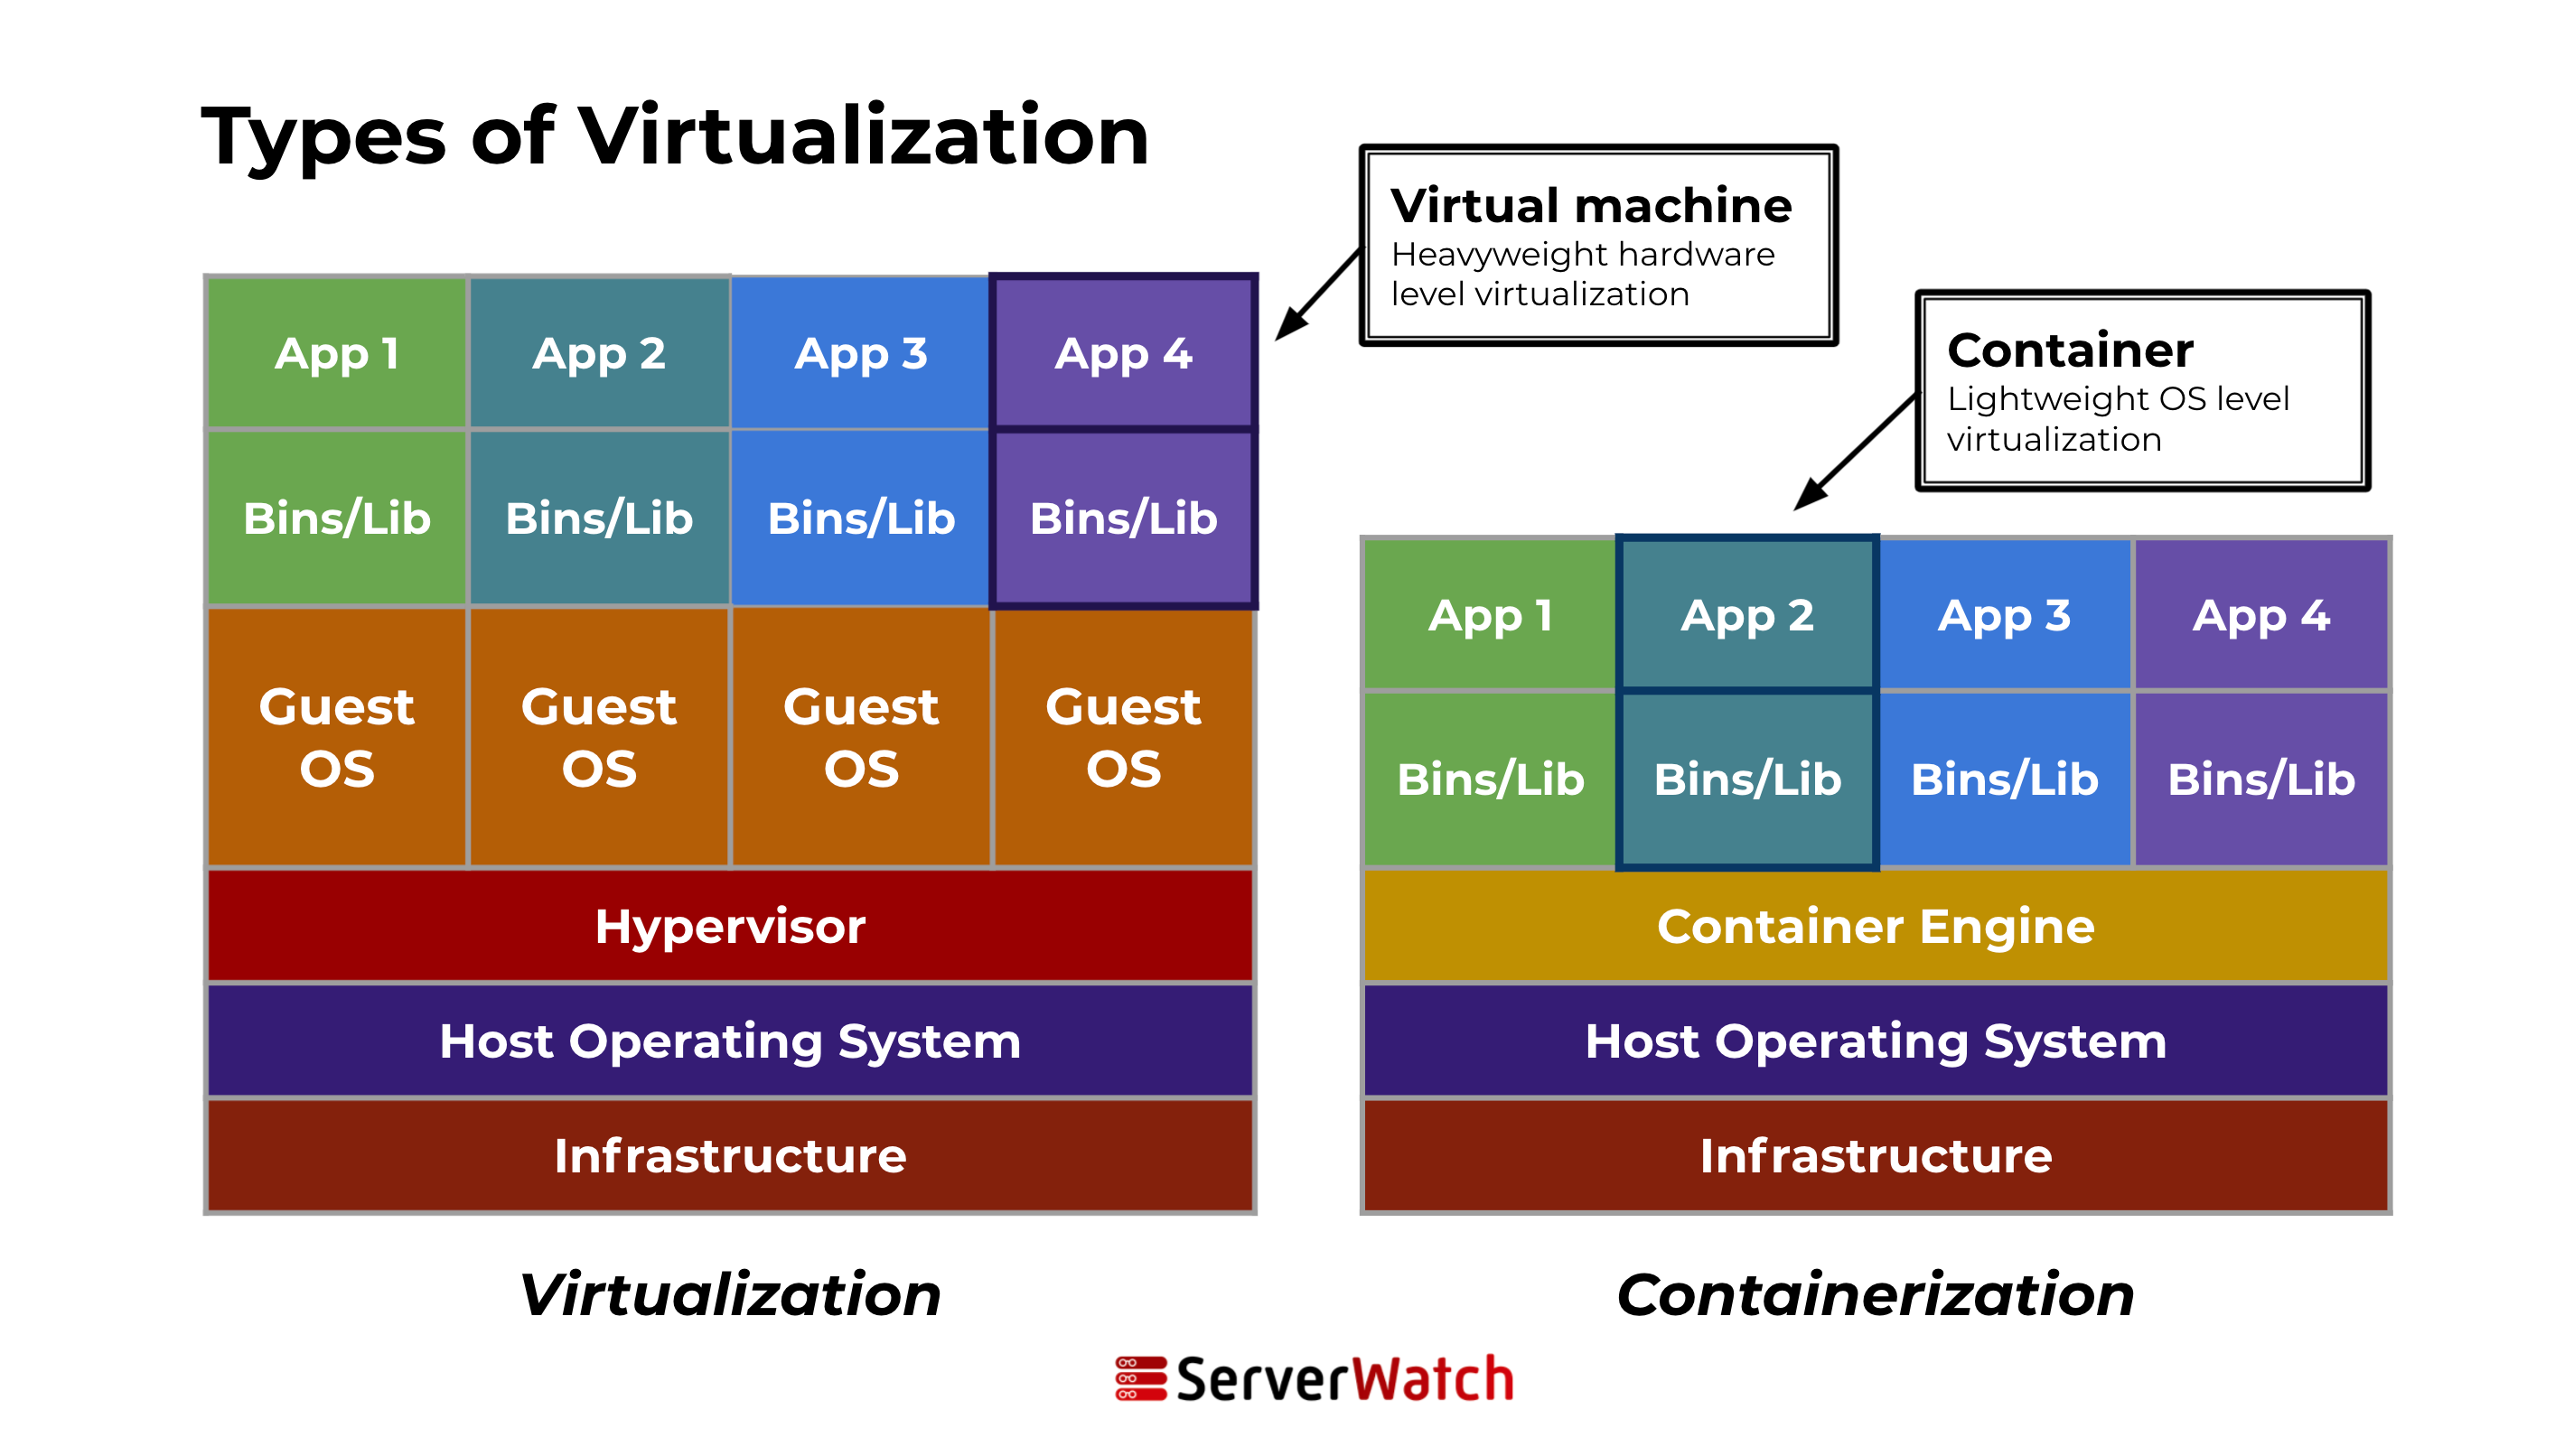 A graphic visual showing the differences between Virtualization which uses a hypervisor and guest operating systems to create virtual machines, and containerization which uses a container engine to create lightweight virtual environments.